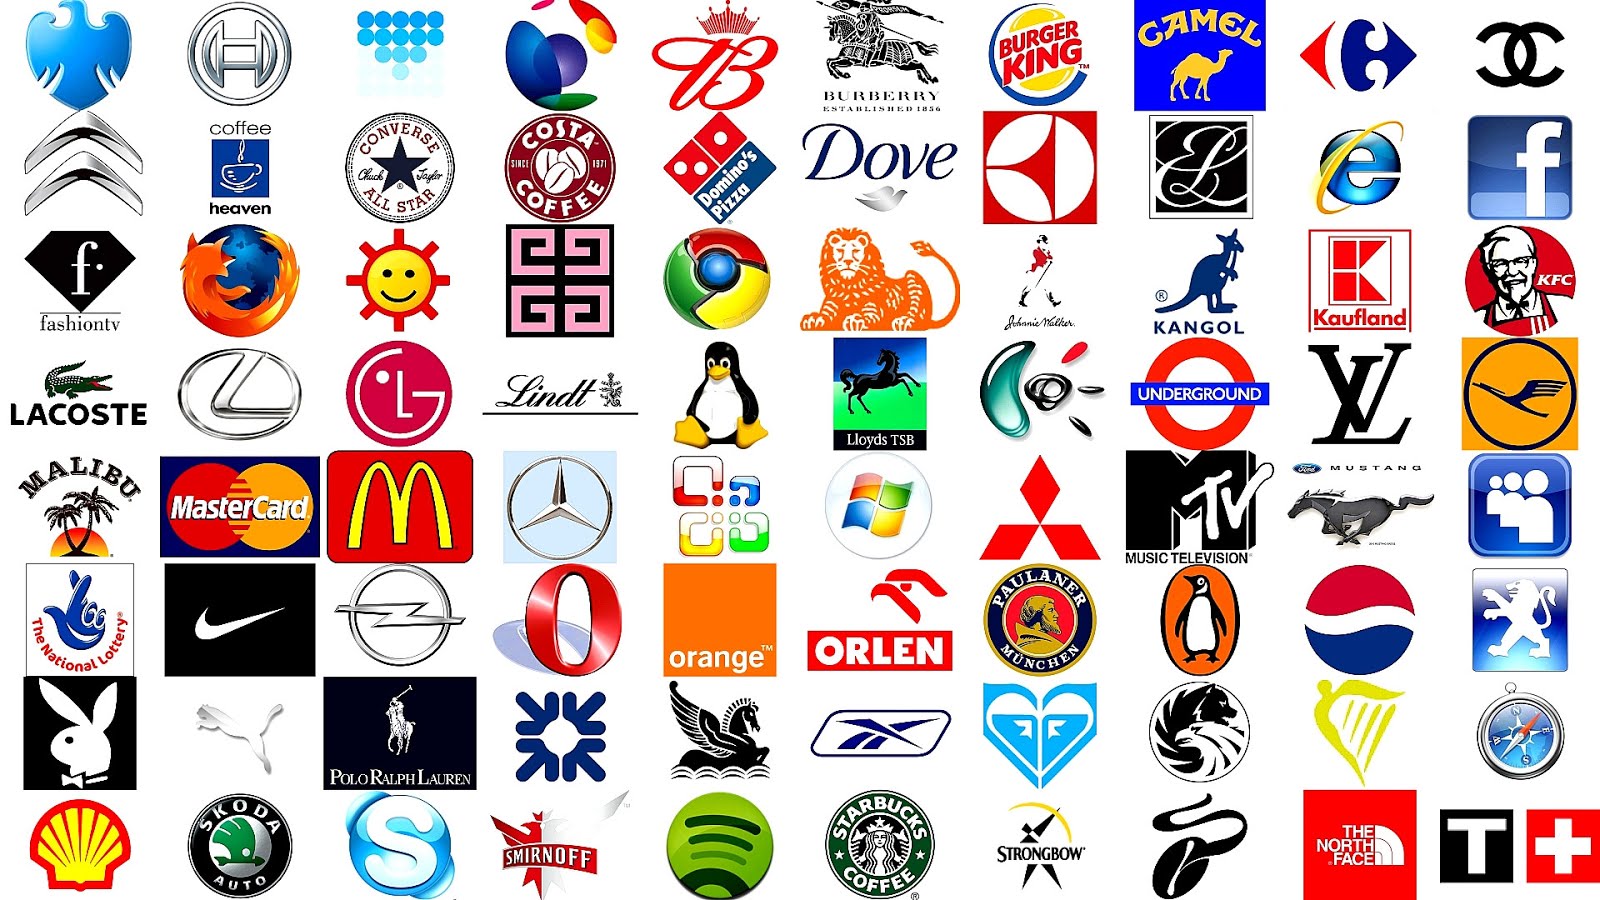 Most Recognizable Brands Brand Choices